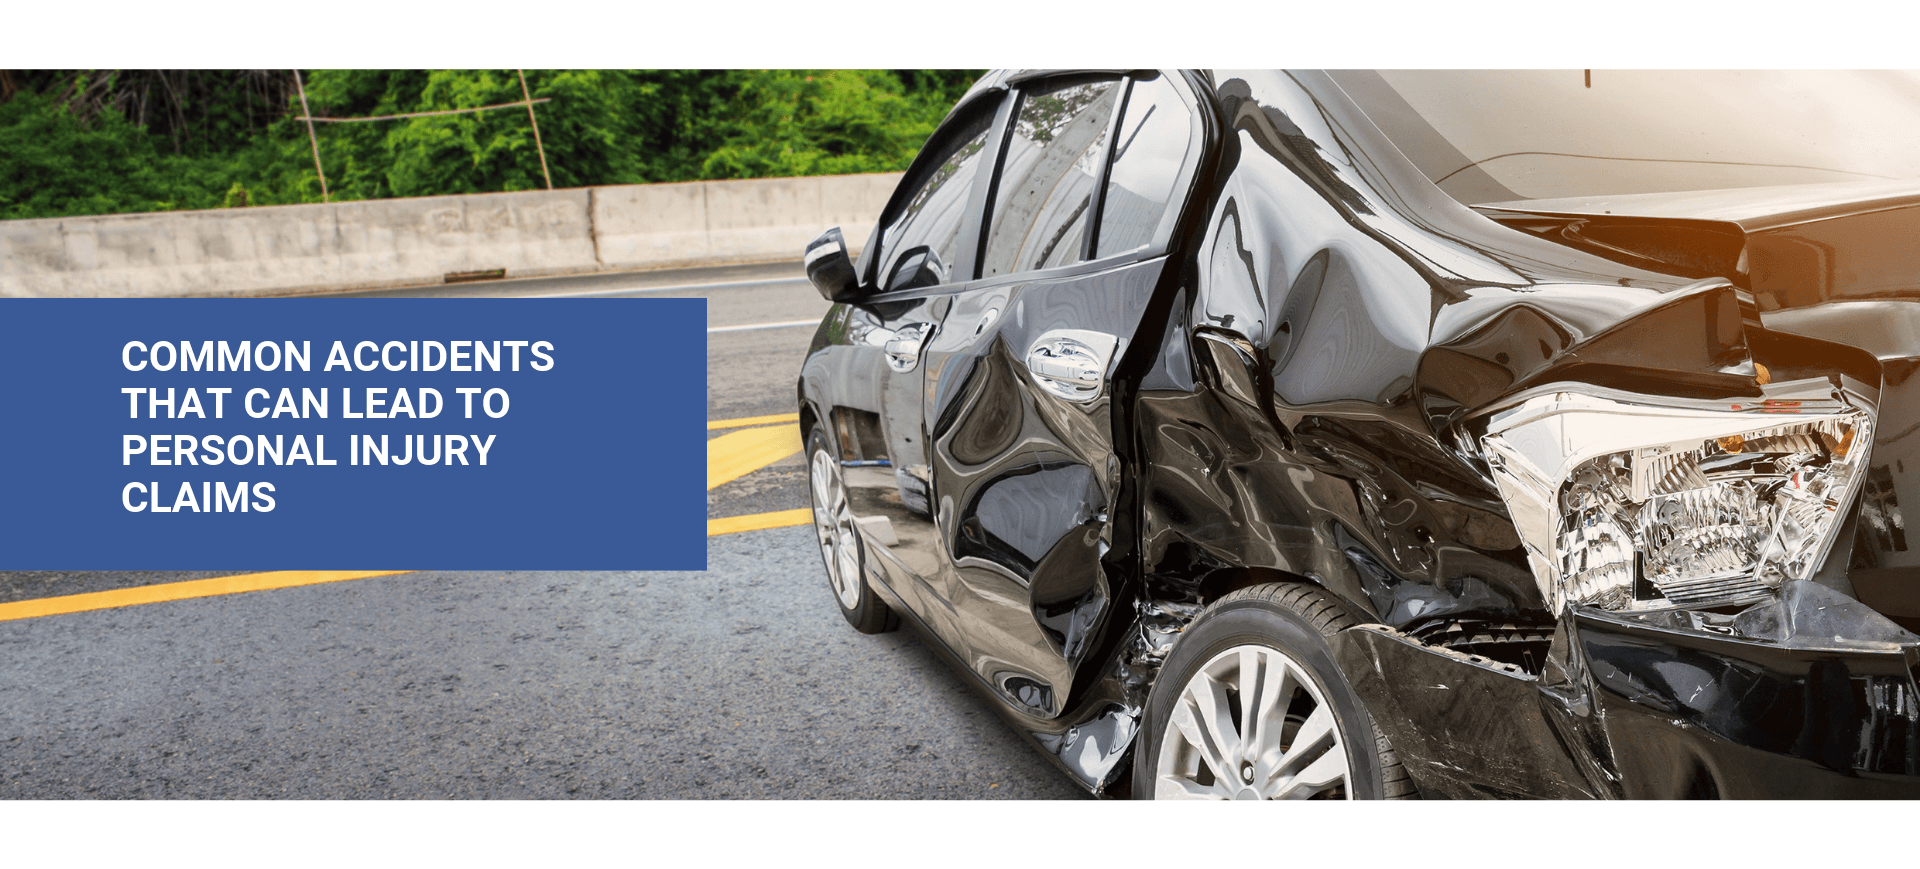 Common Accidents That Can Lead to Personal Injury Claims